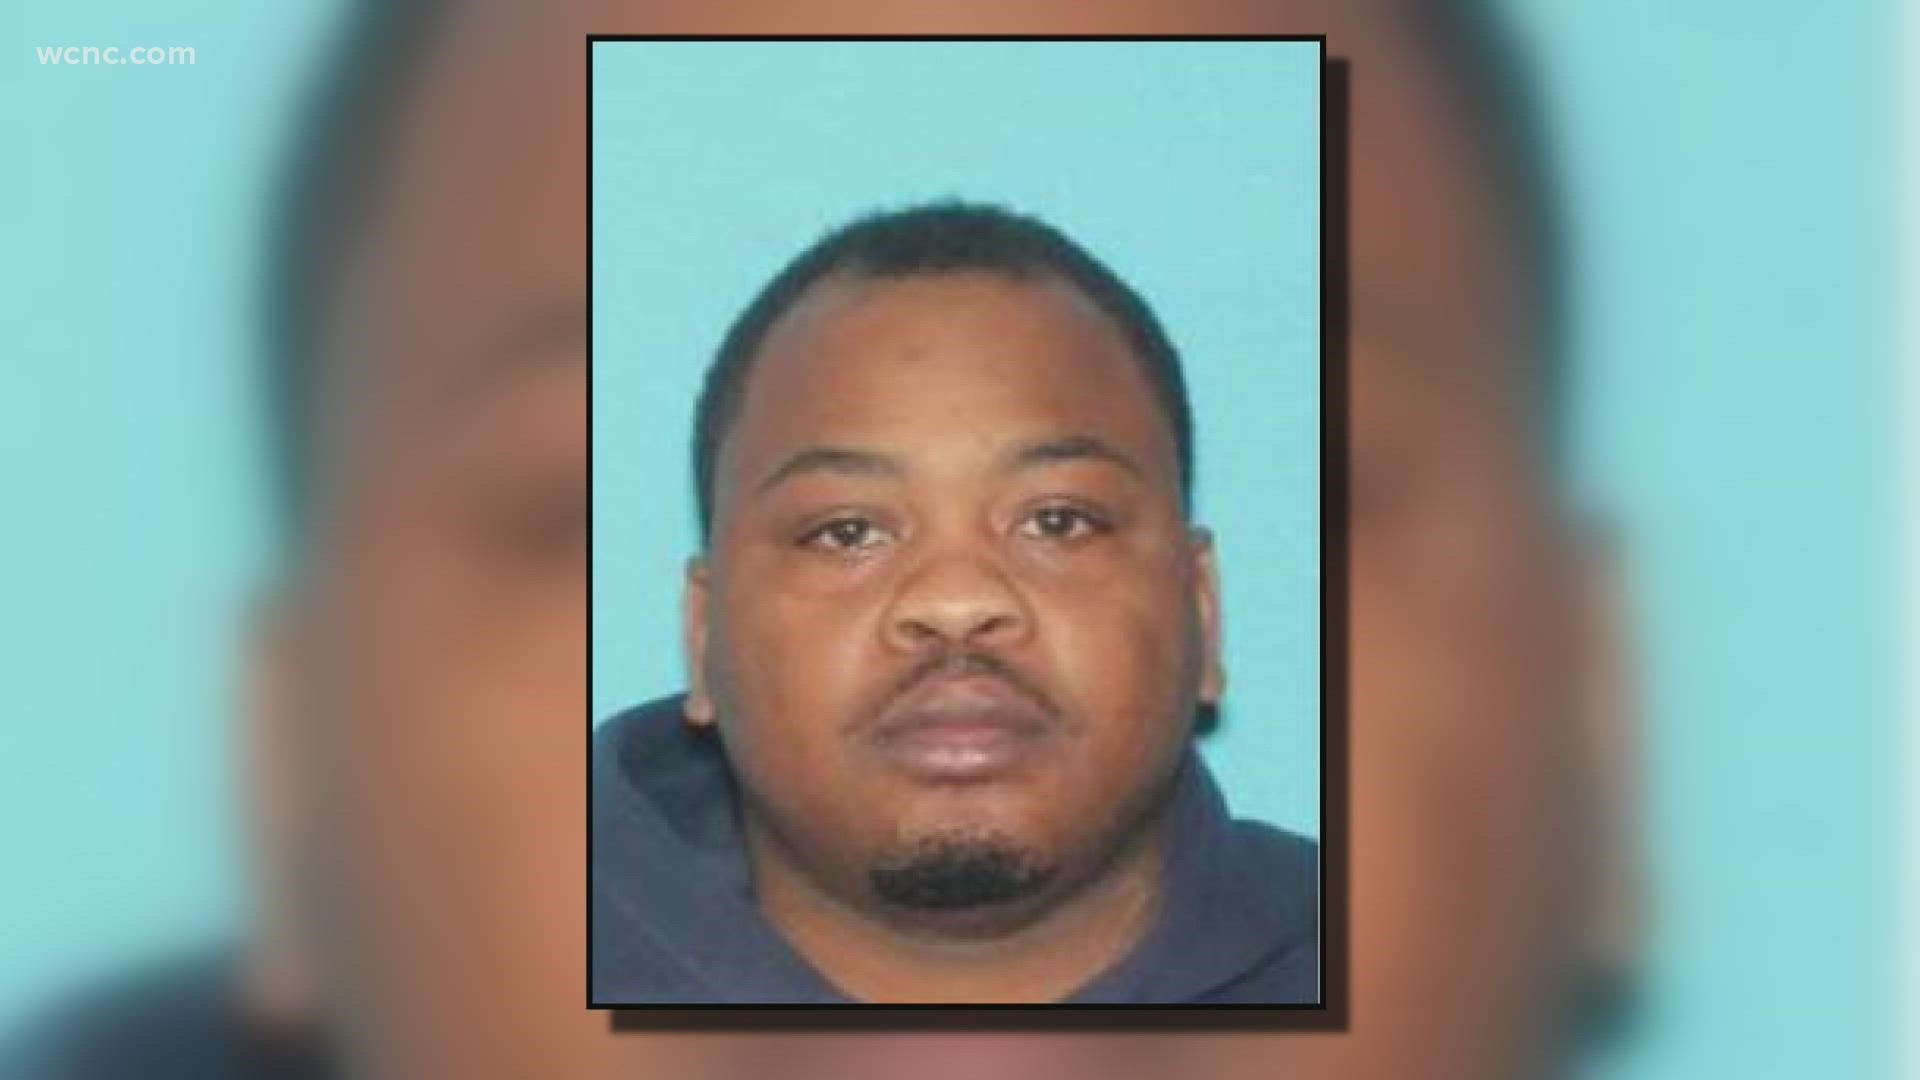 Officers said 30-year-old Bruce Adams is wanted for murder and armed robbery.